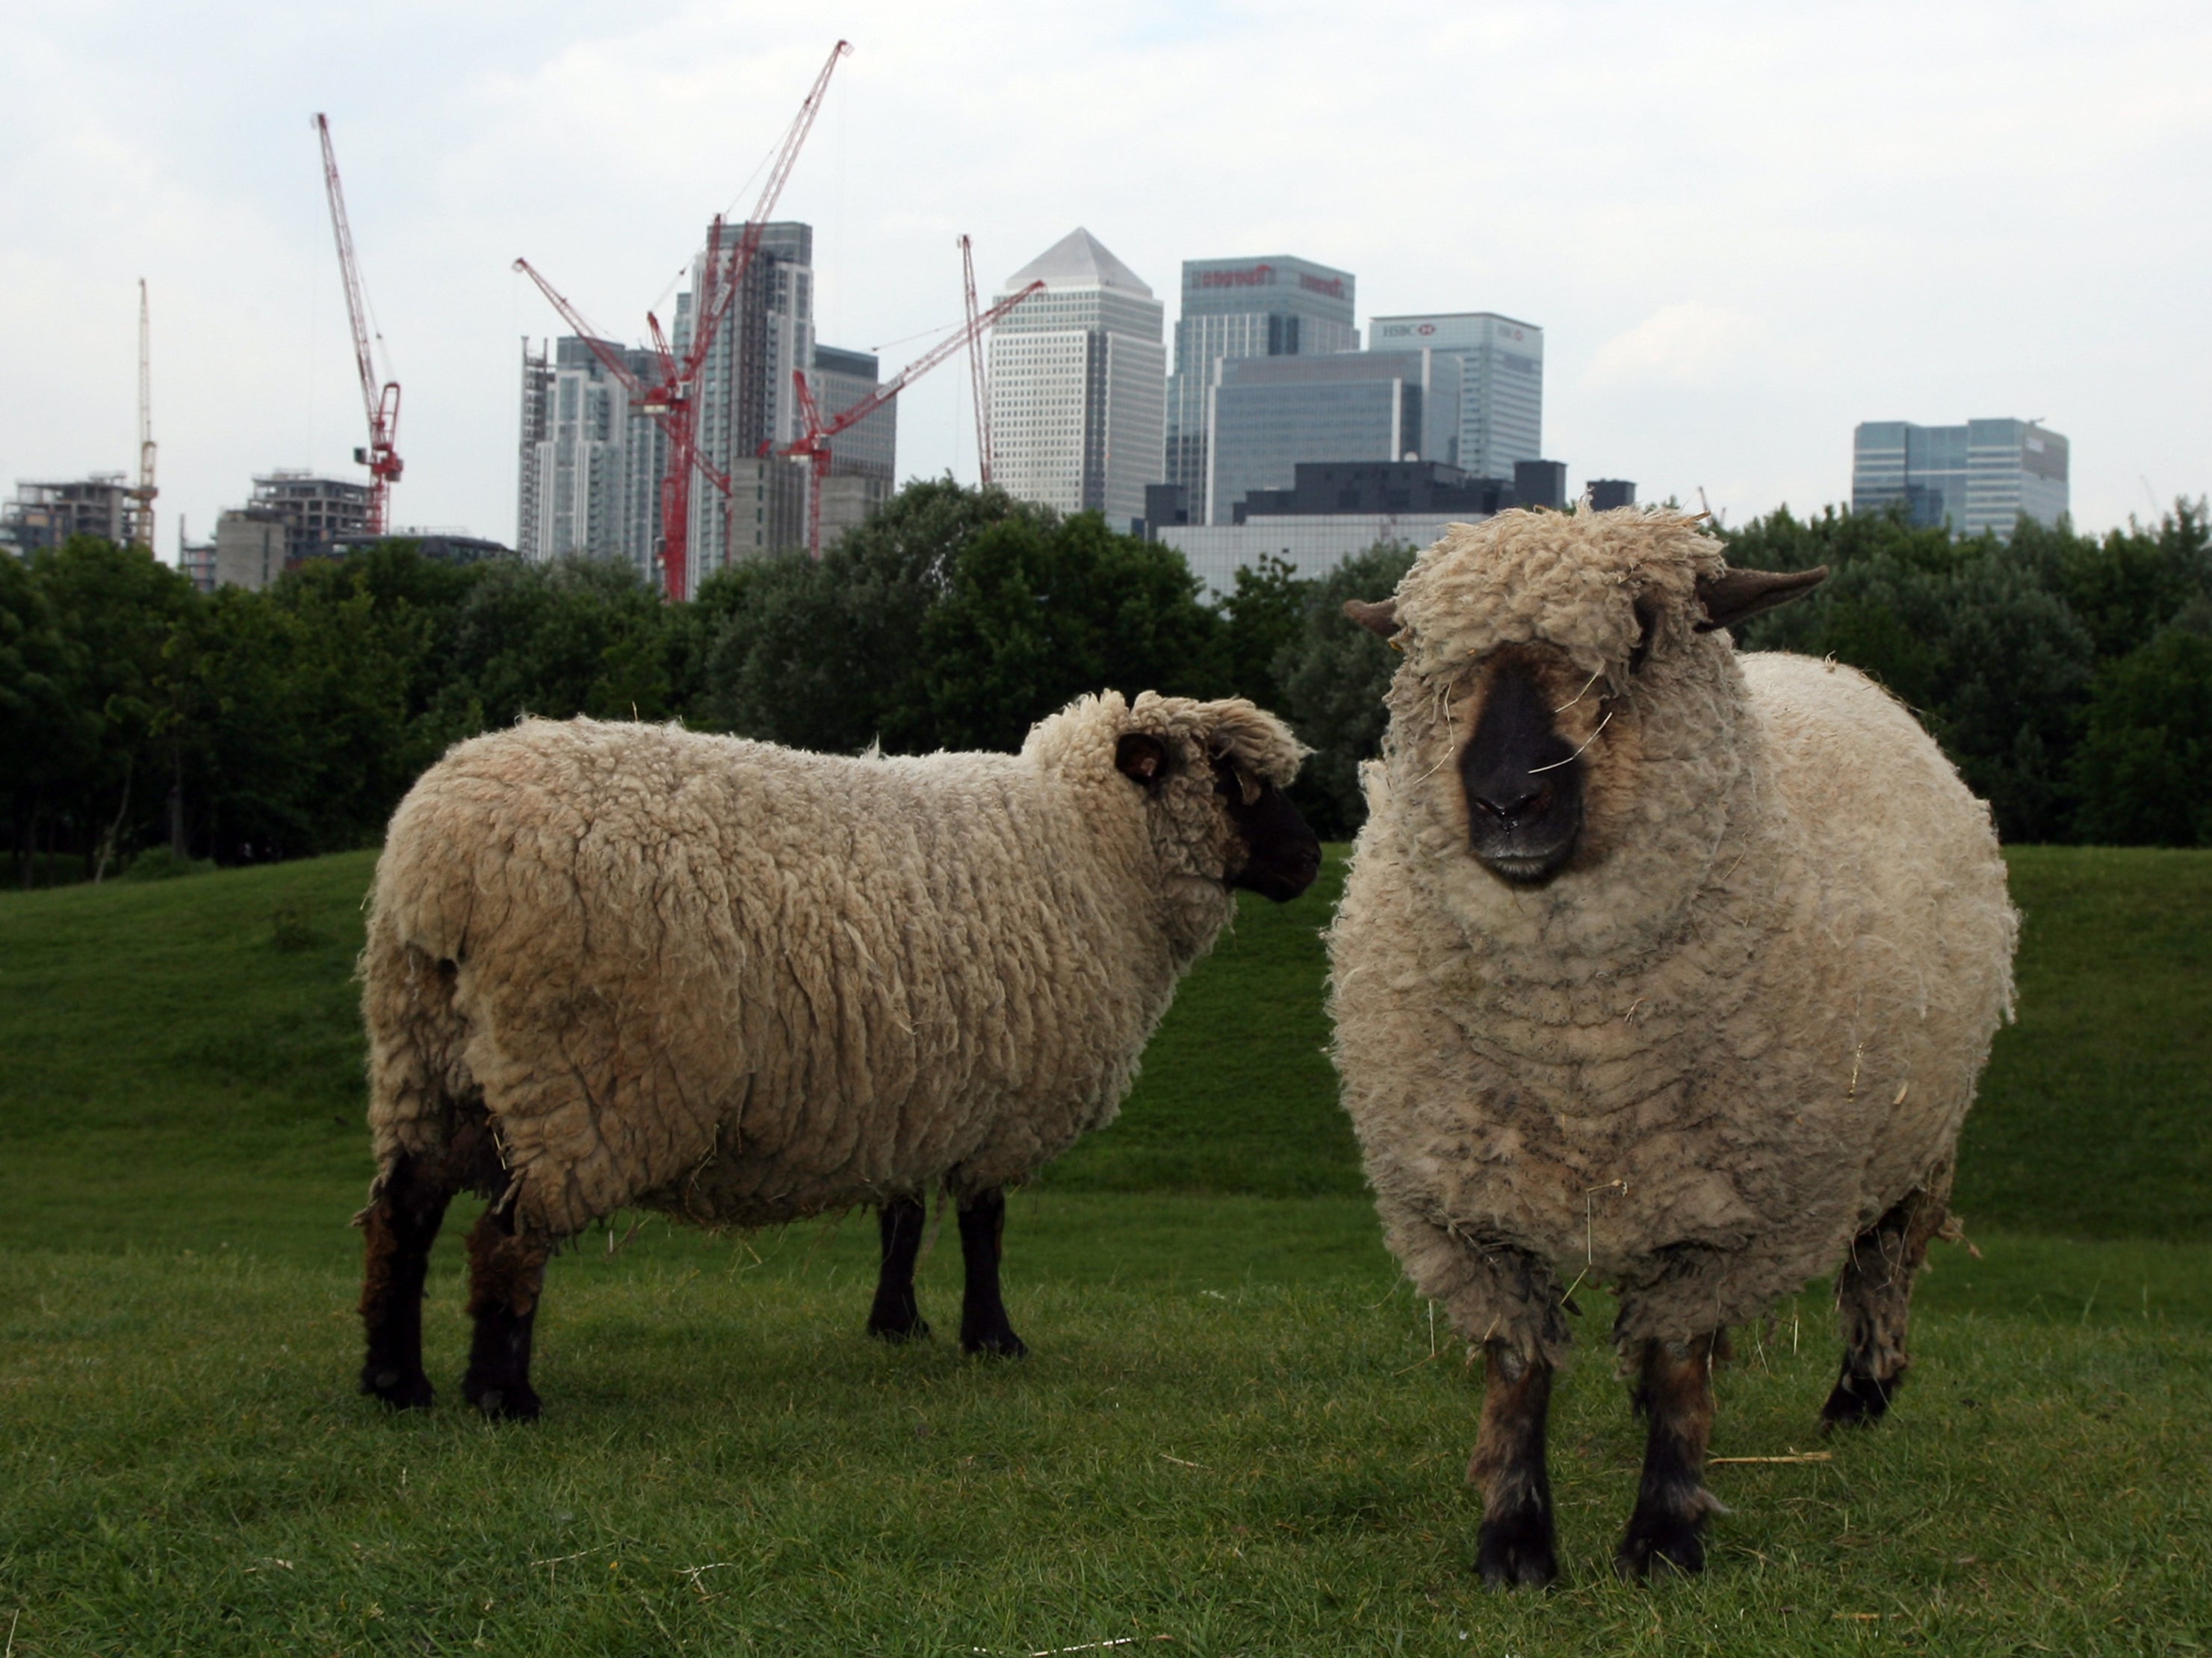 The park, which has more than 100 animals, is one of the Europe's biggest city farms